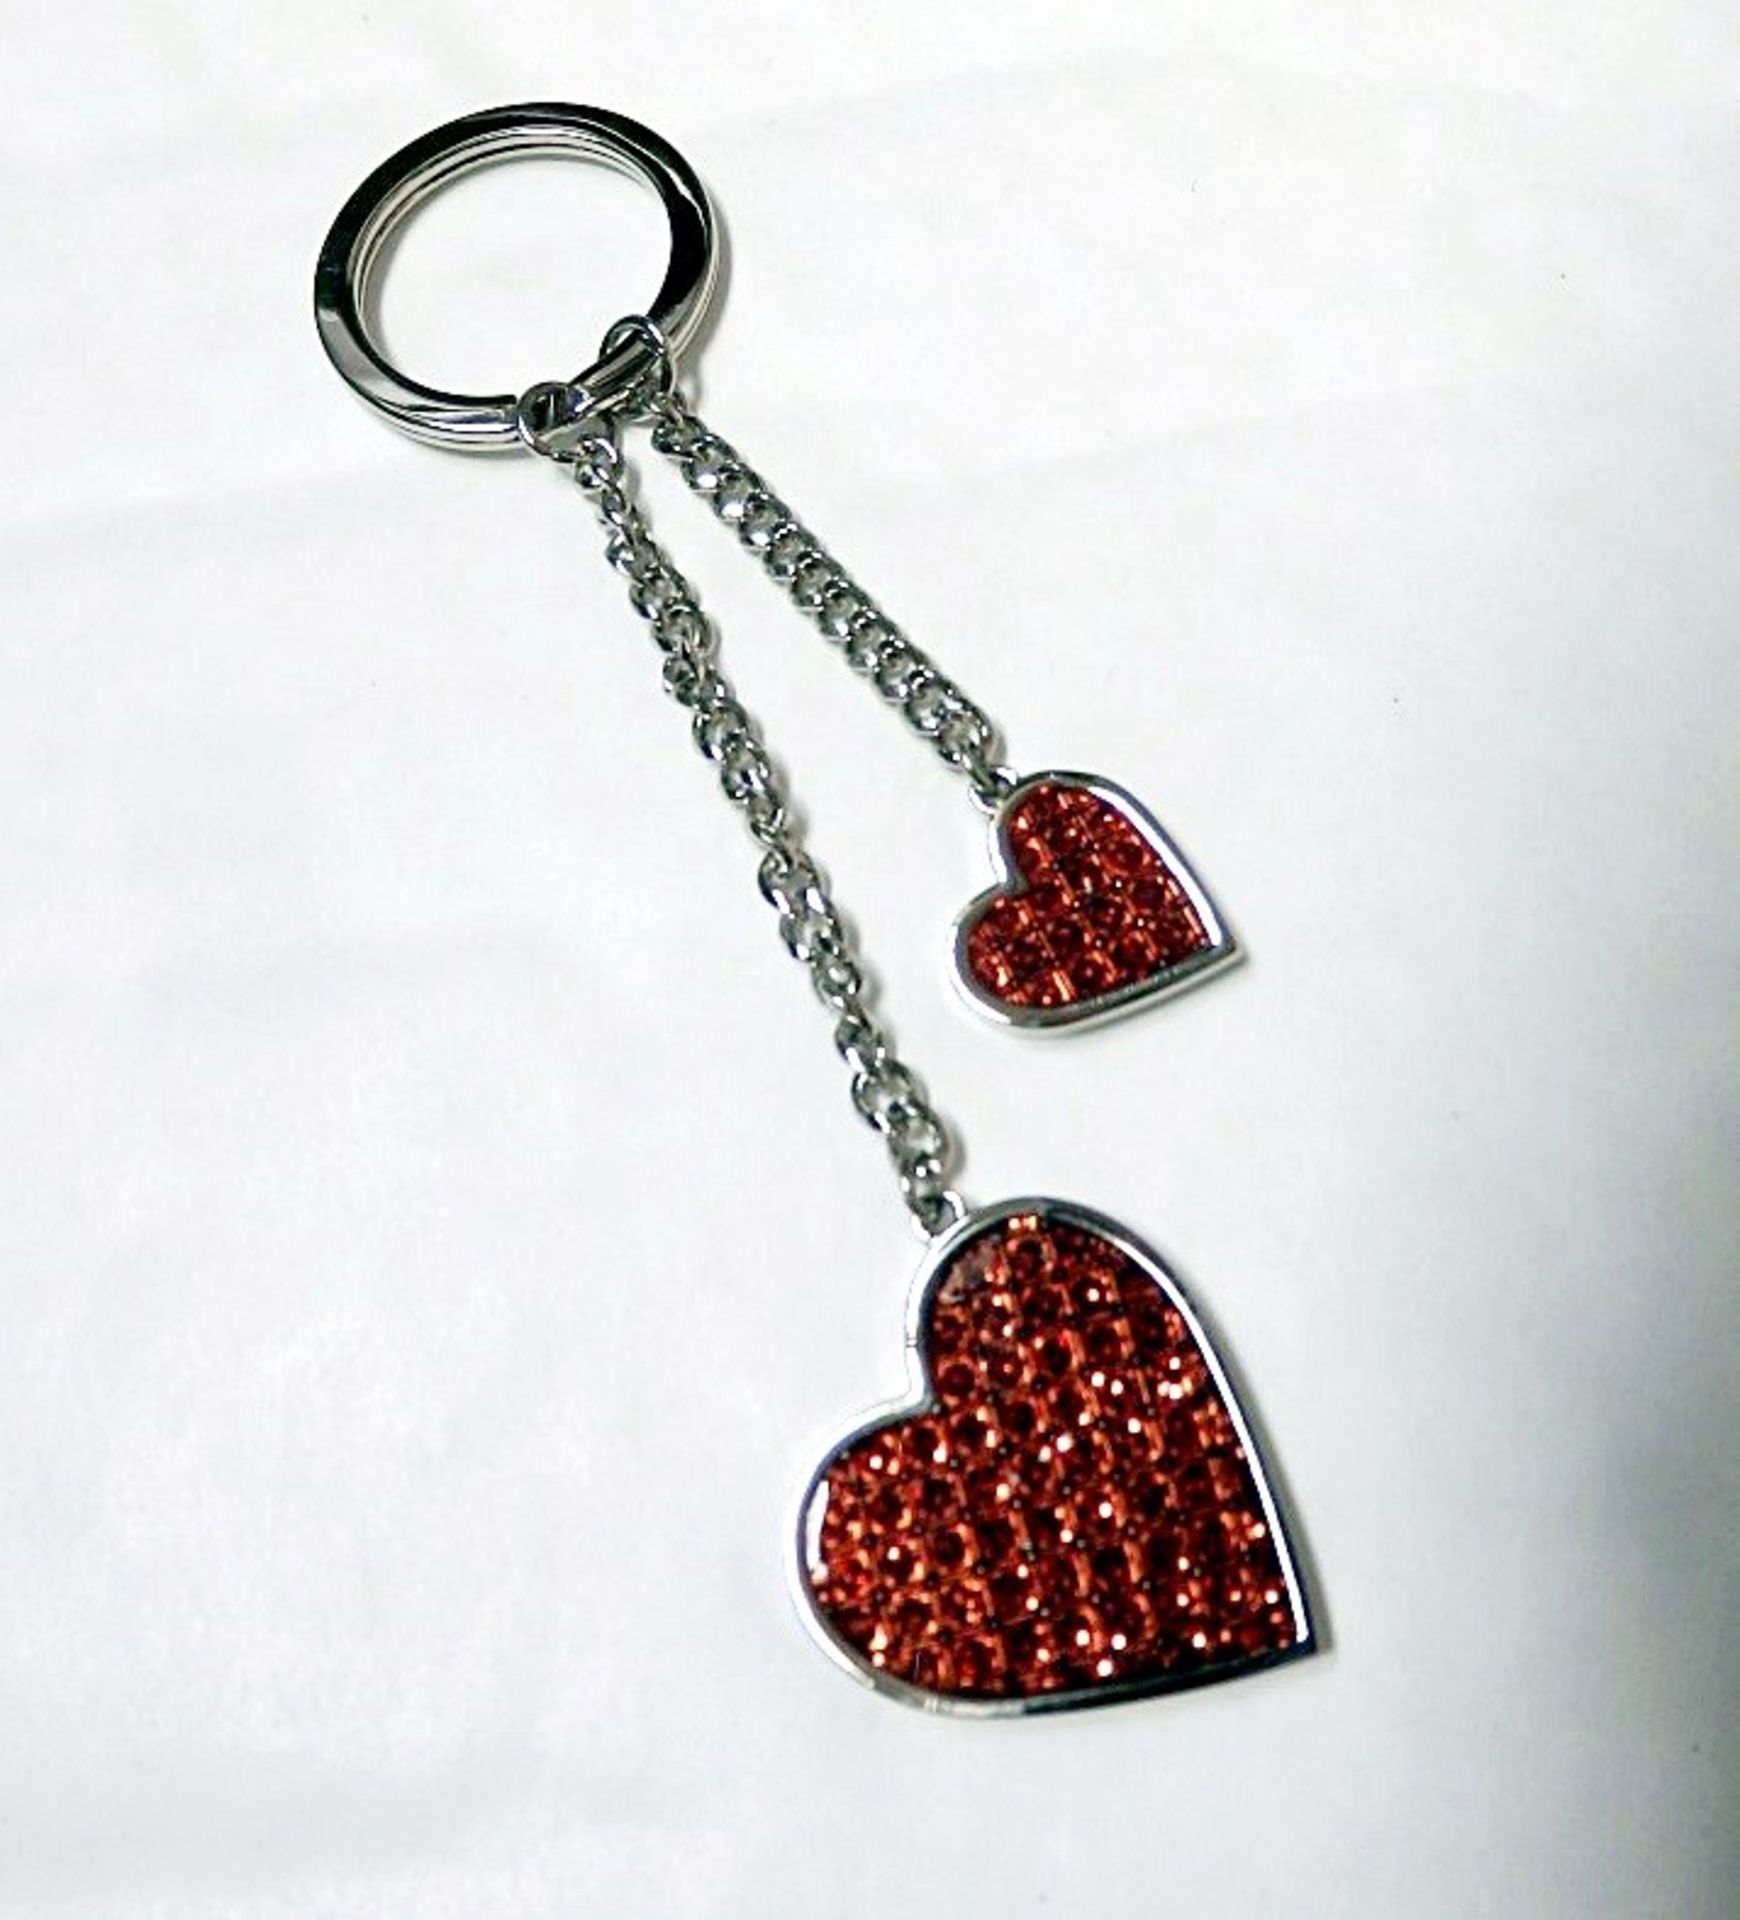 10 x Sterling Silver Plated Red Heart Key Rings with ICE London Crystals - Brand New & Sealed - Image 2 of 4